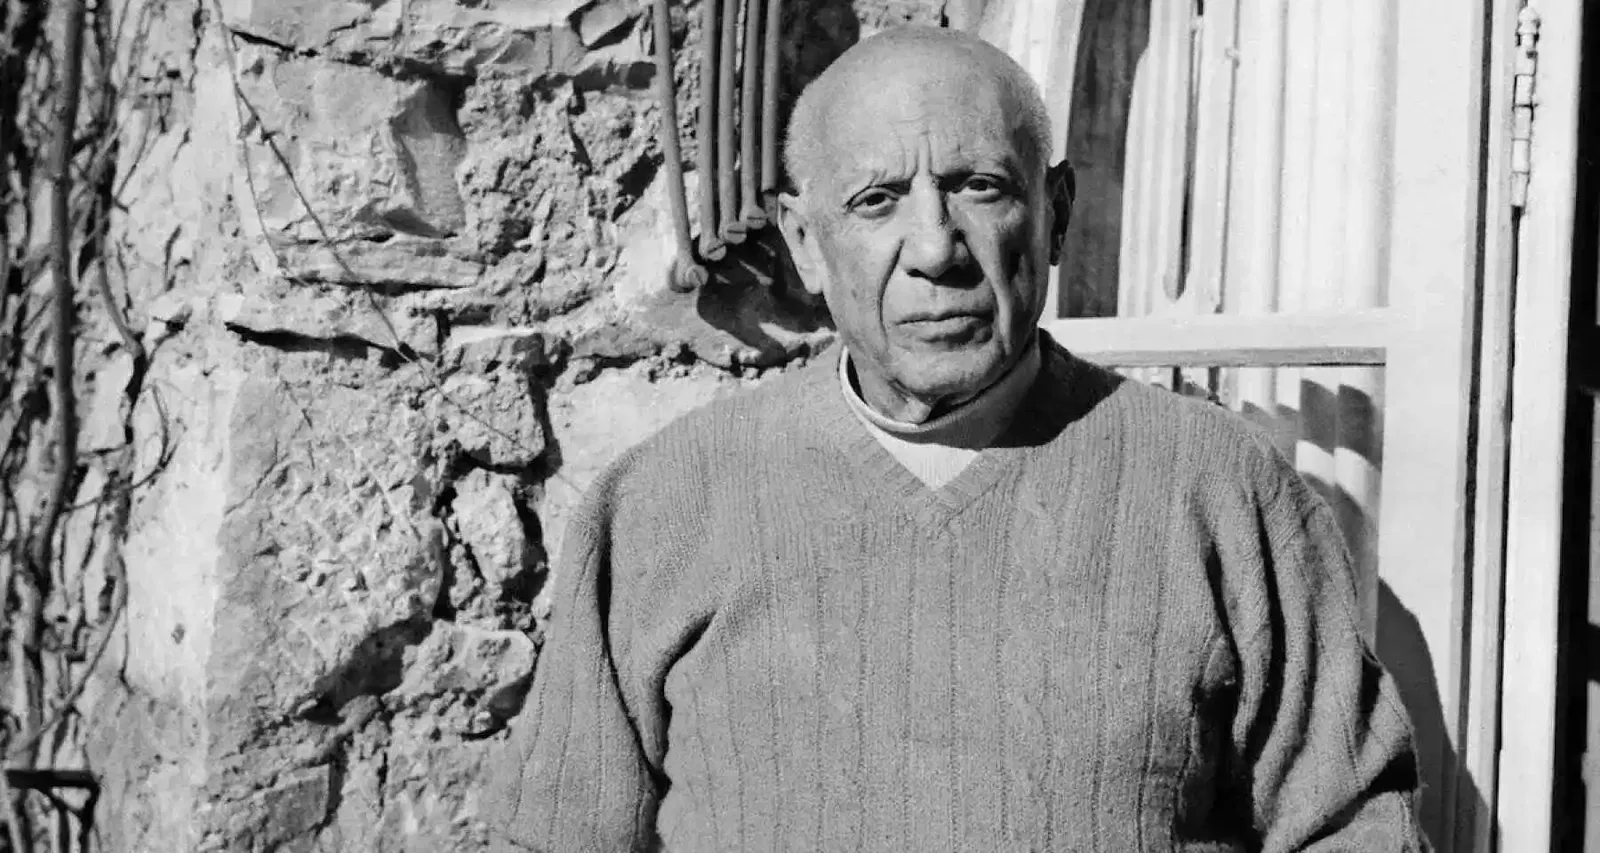 Pablo Picasso: An artistic journey through the ages